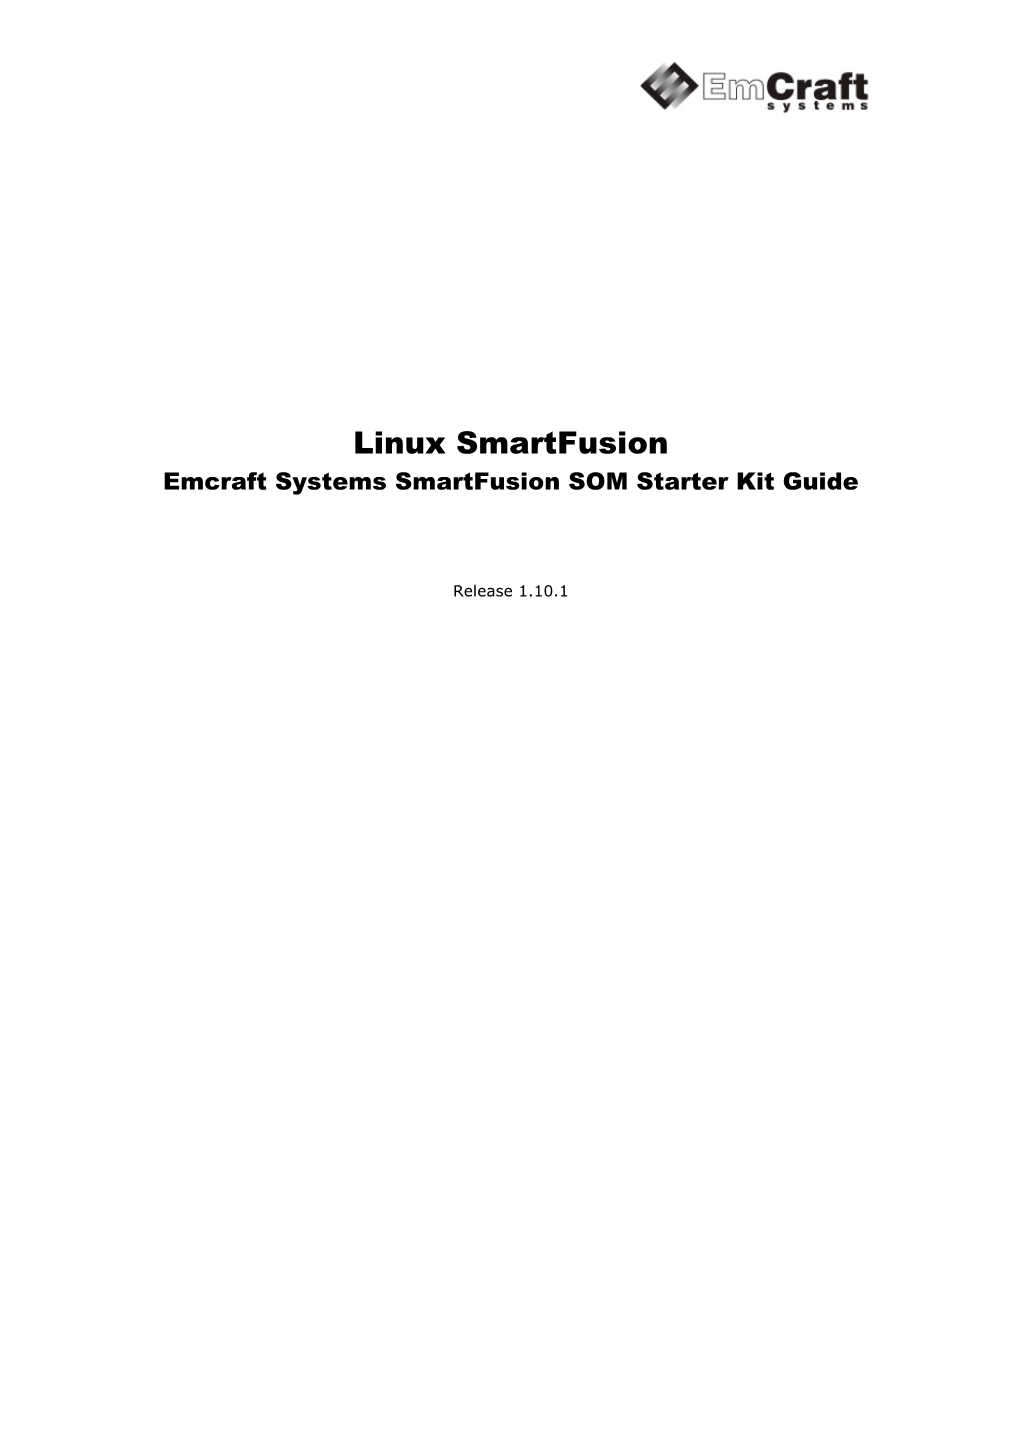 Linux Smartfusion Emcraft Systems Smartfusion SOM Starter Kit Guide